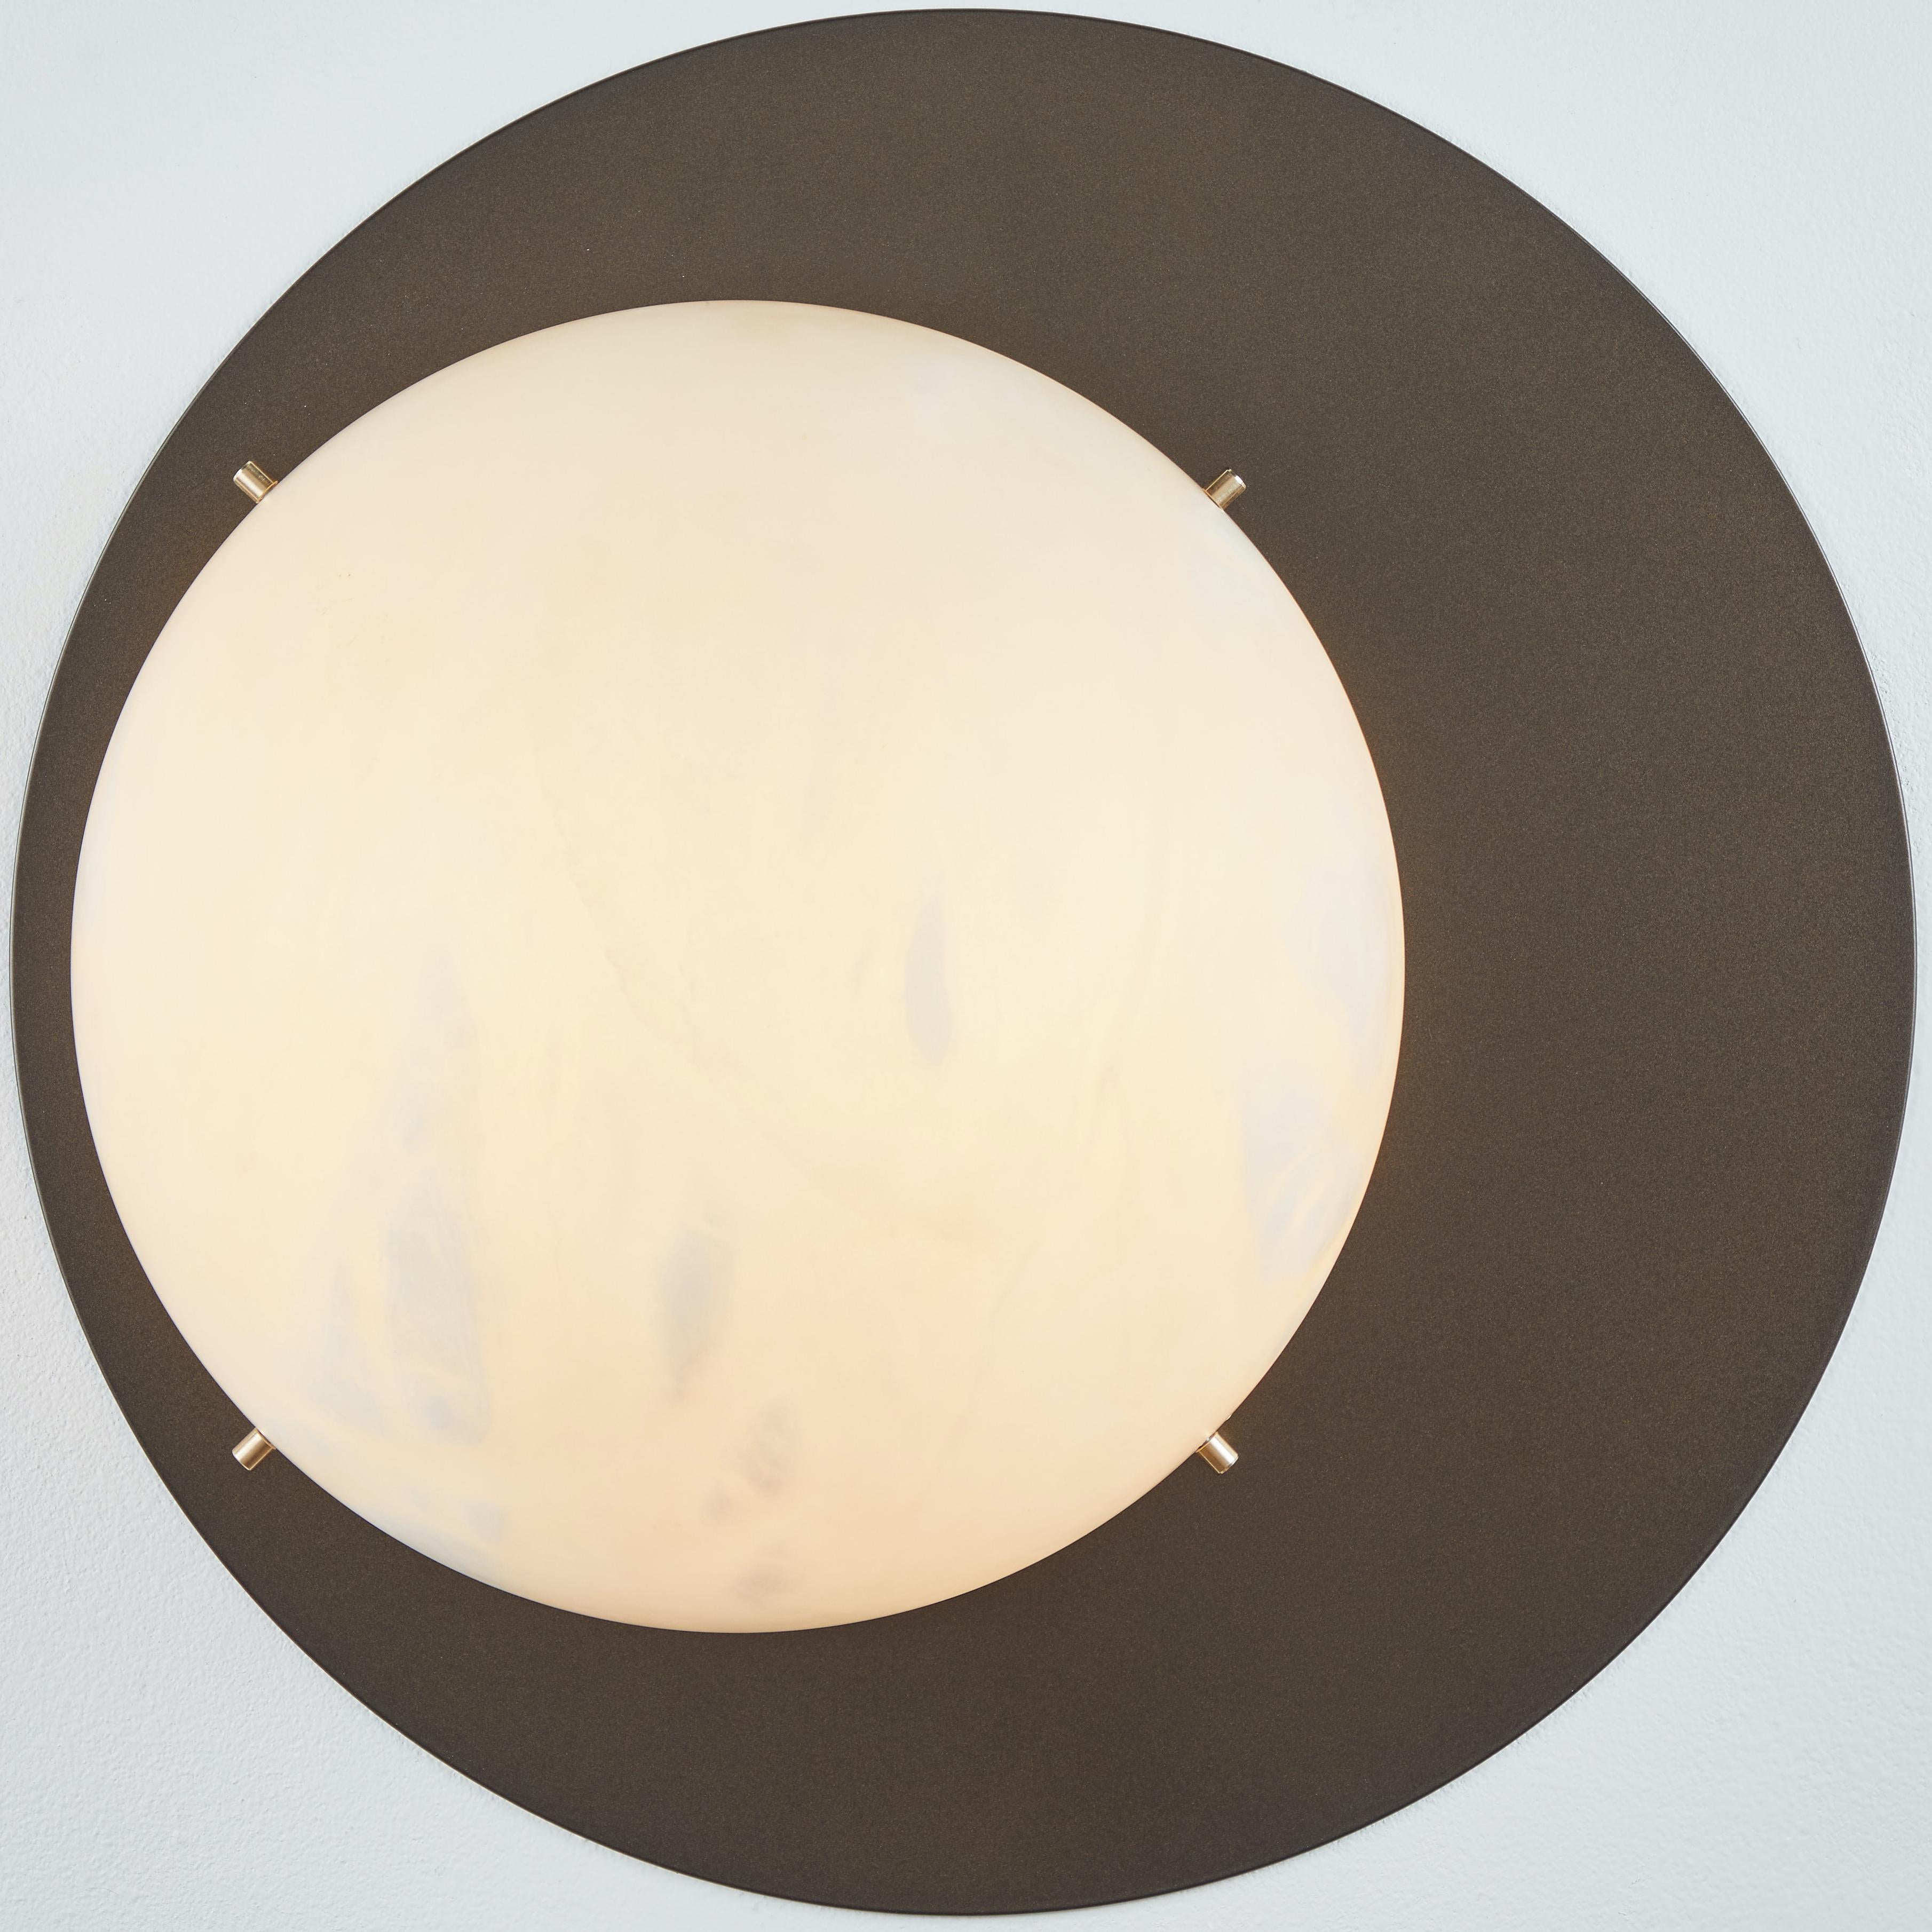 Large 'Saturn' Sconce in Brass and Alabaster In New Condition For Sale In Glendale, CA